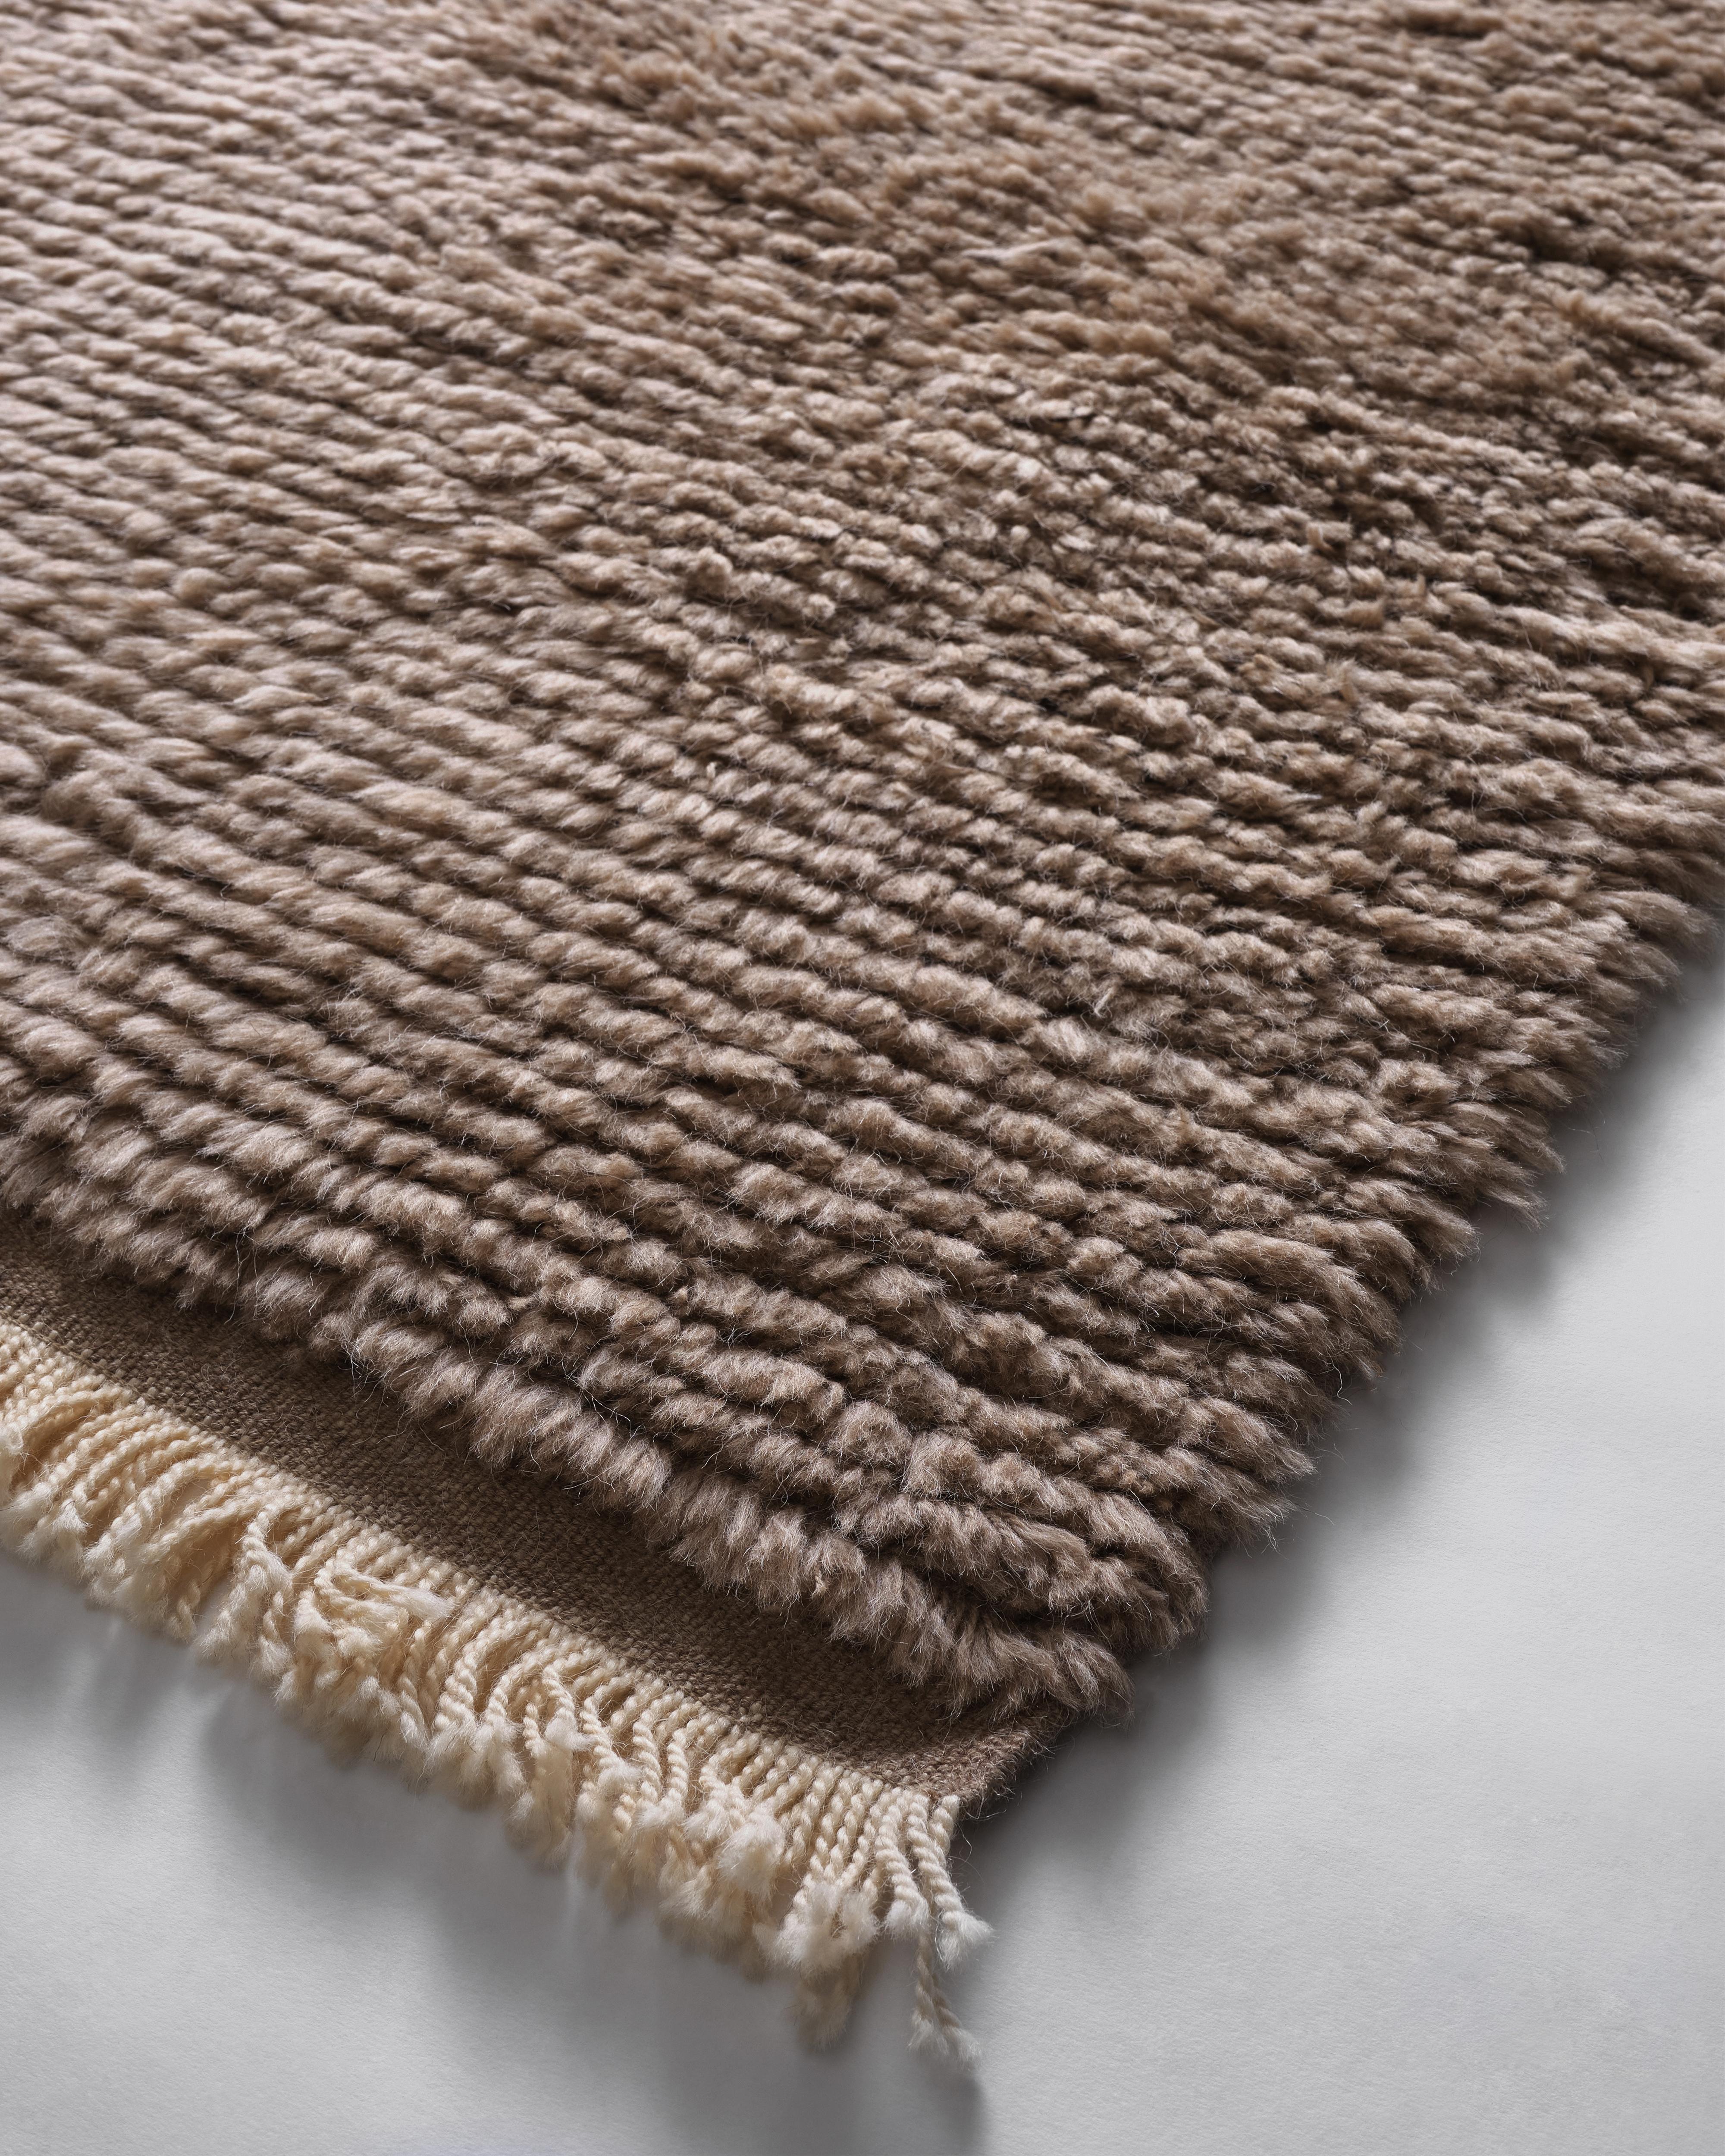 Introducing The Shag Rug collection. Anne and Maggie grew up with a 1970s Flokati rug their Mom shlepped home from Greece during her world travels. They've been wanting to recreate that style since day one - a thick, 70s, run your fingers through,